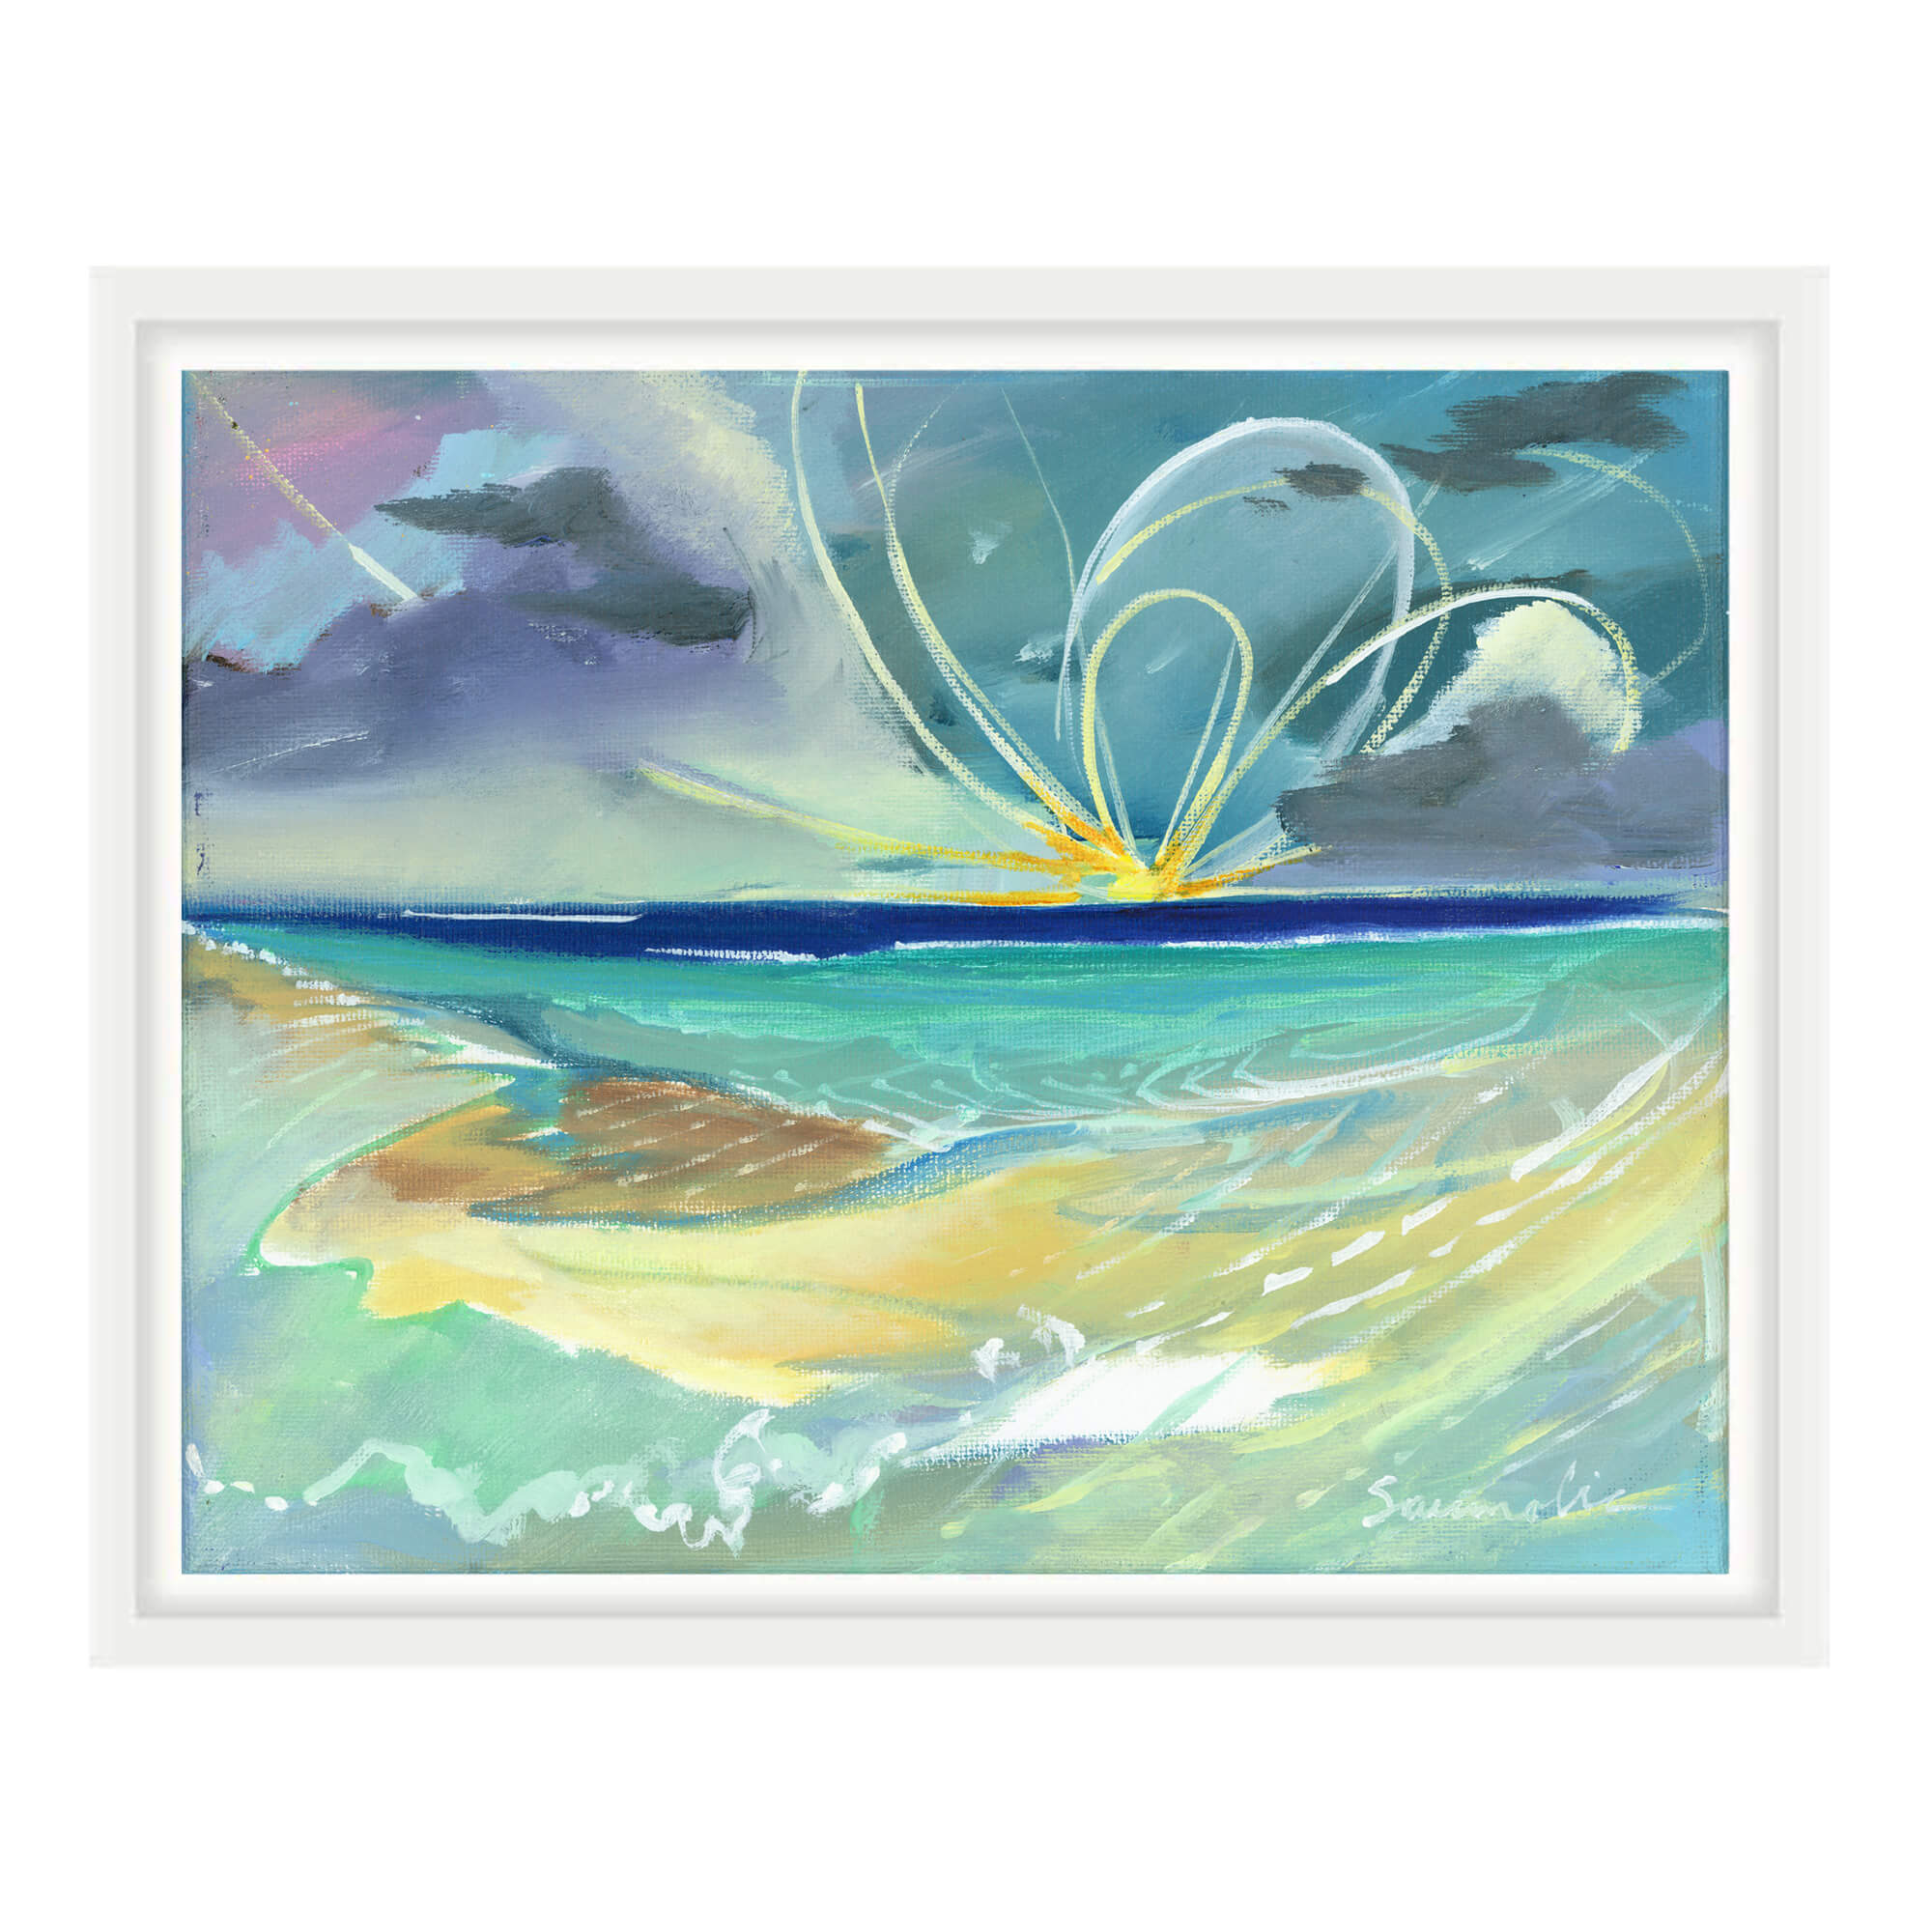 Seascape with rolling waves and blue hued distant water by Hawaii artist Saumolia Puapuaga